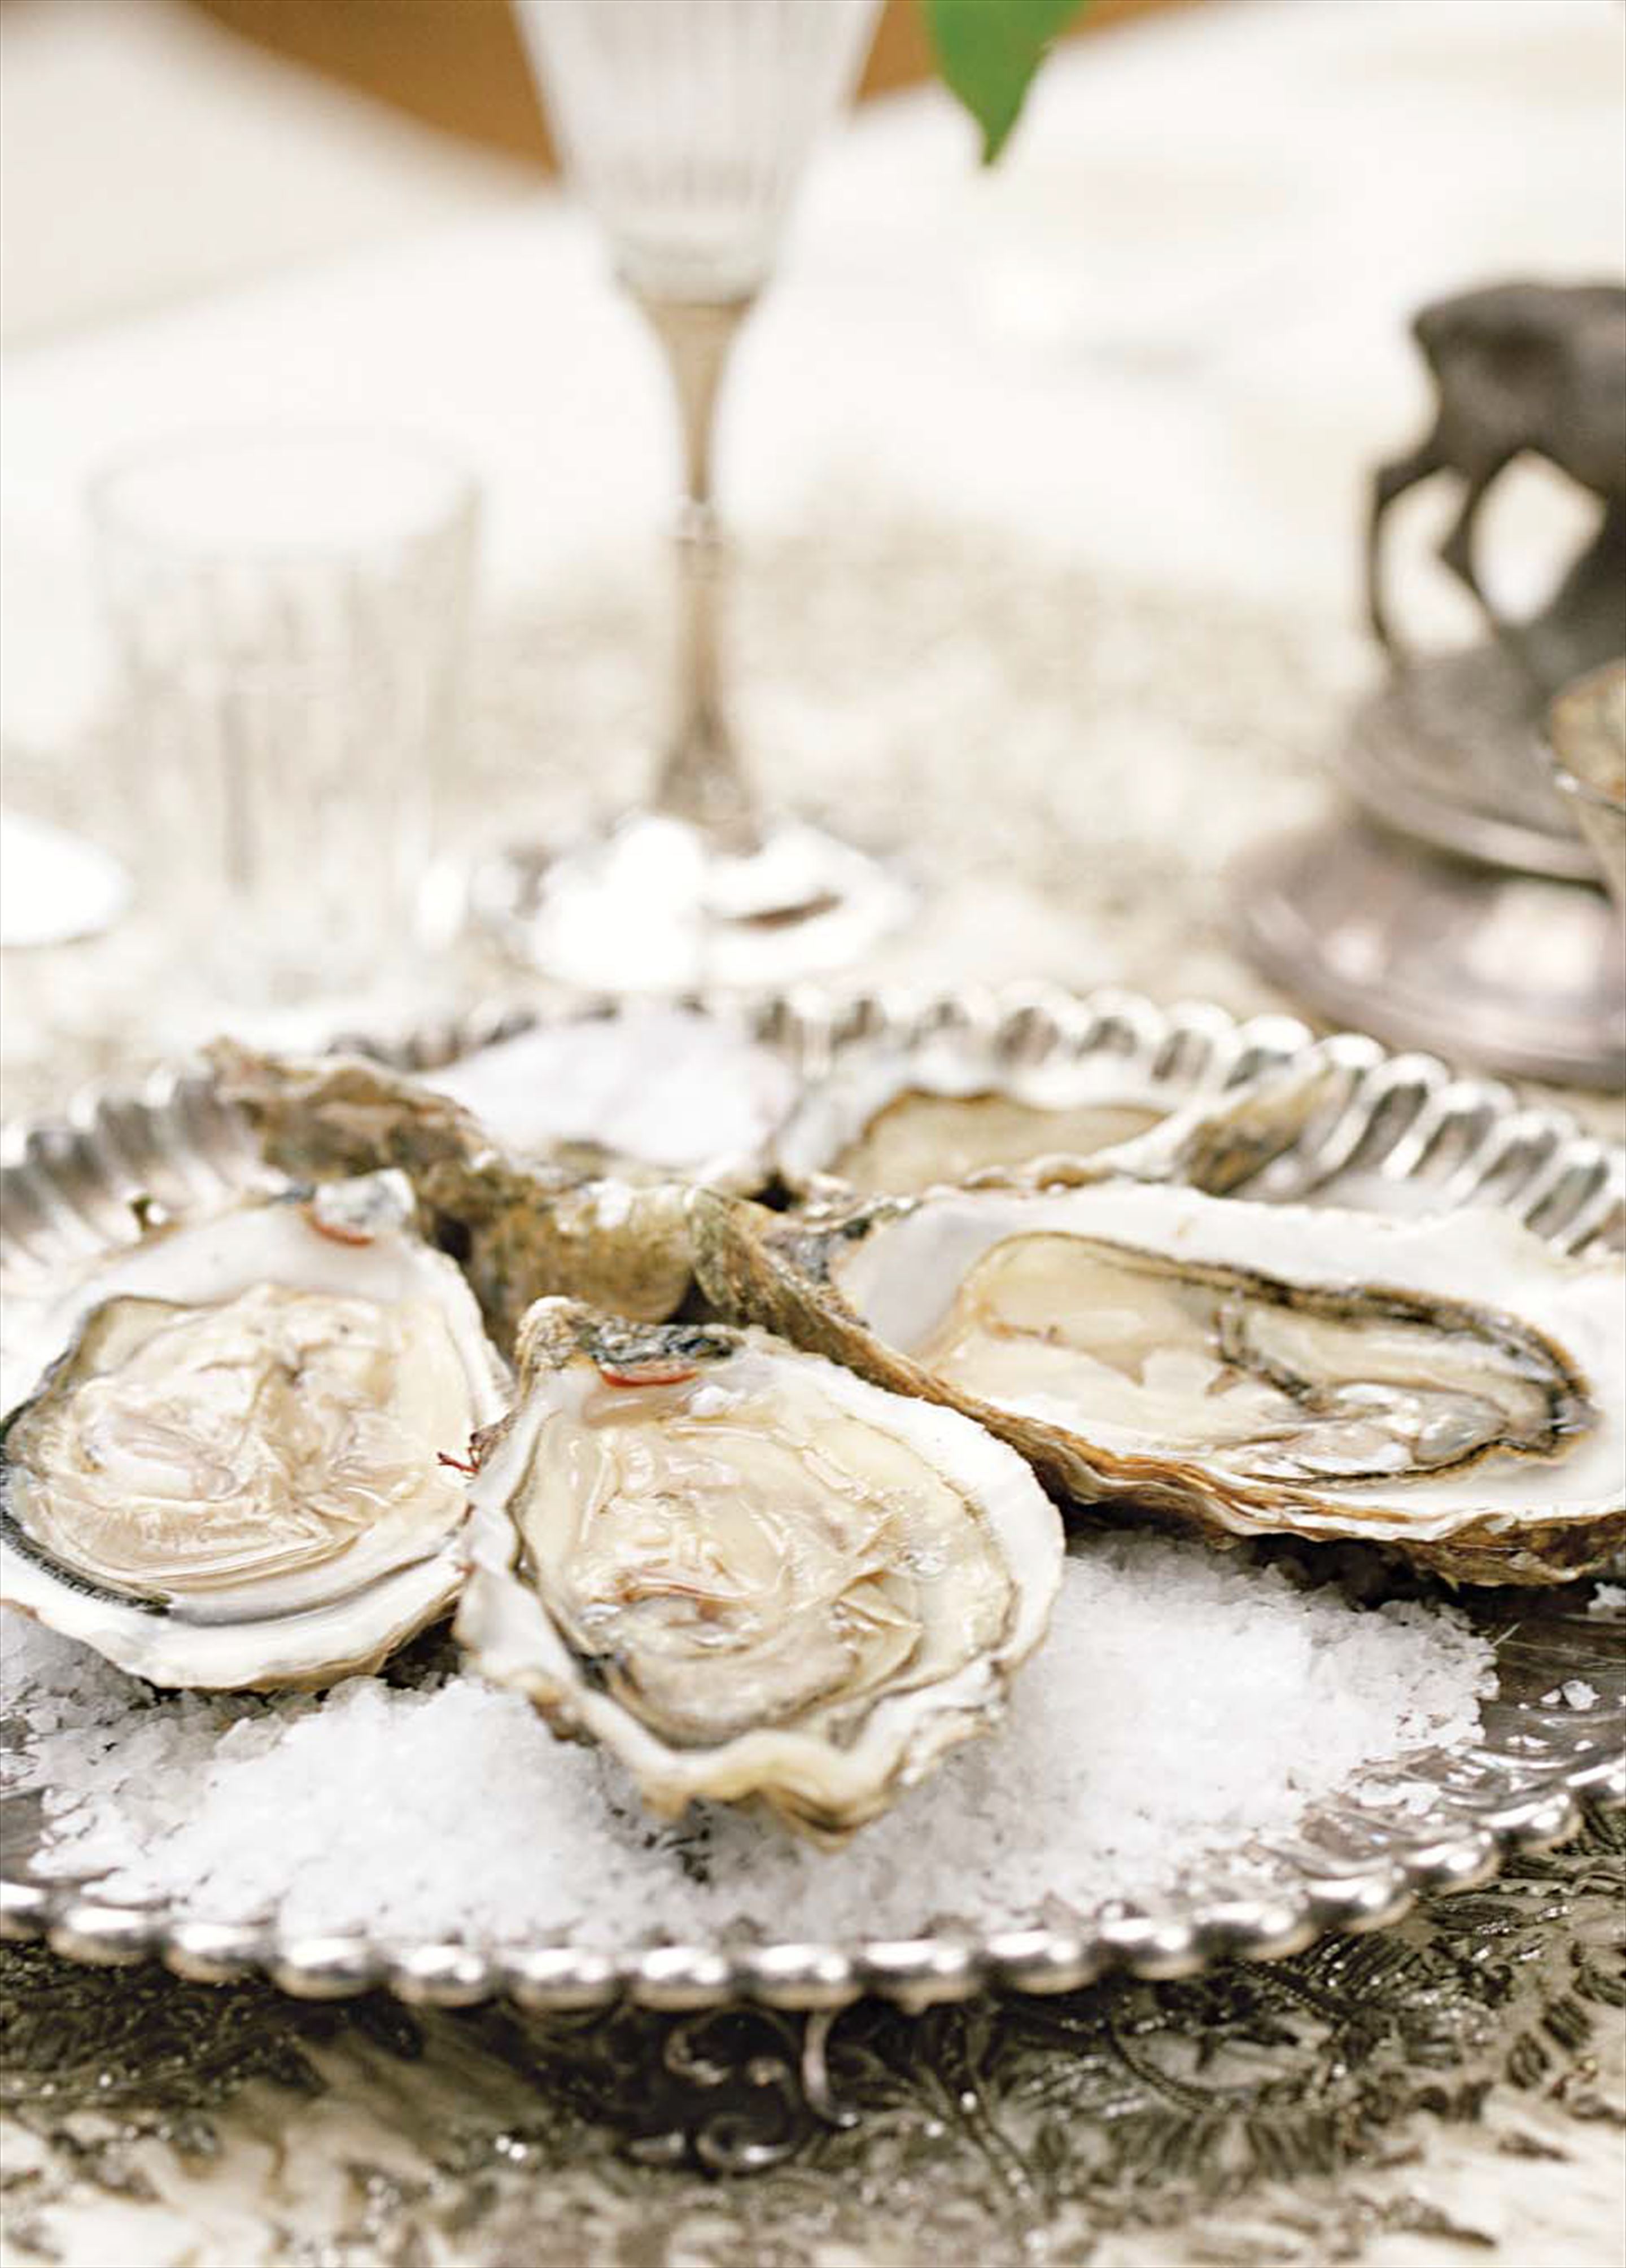 Oysters with mignonette sauce